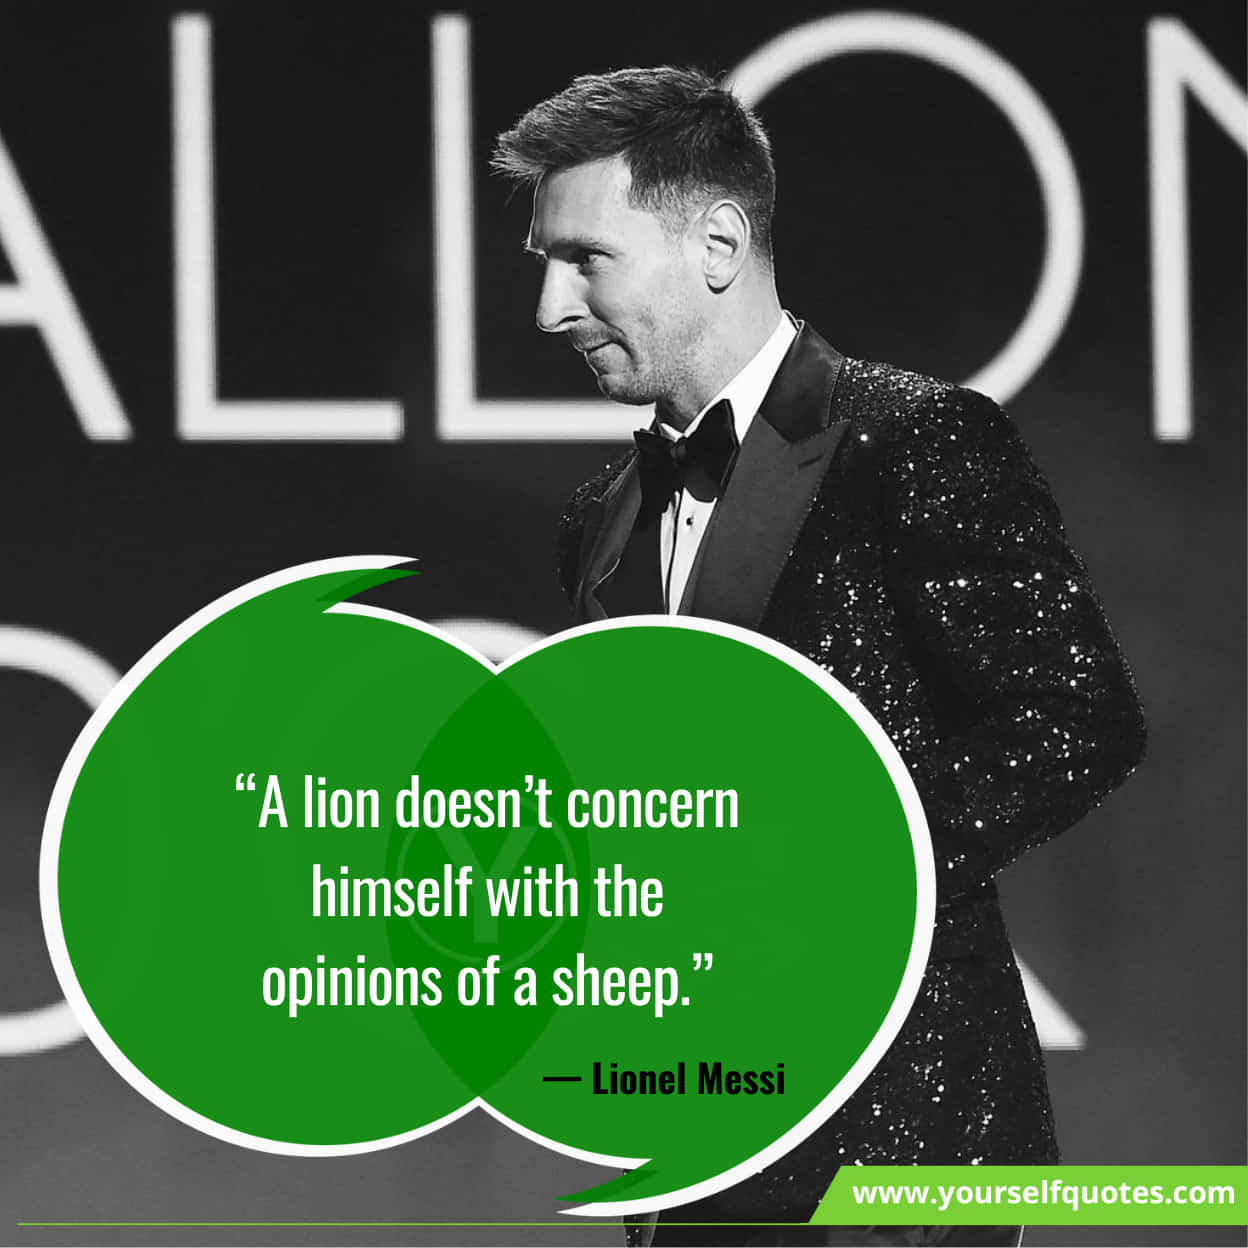 Exciting Inspirational Quotes By Lionel Messi